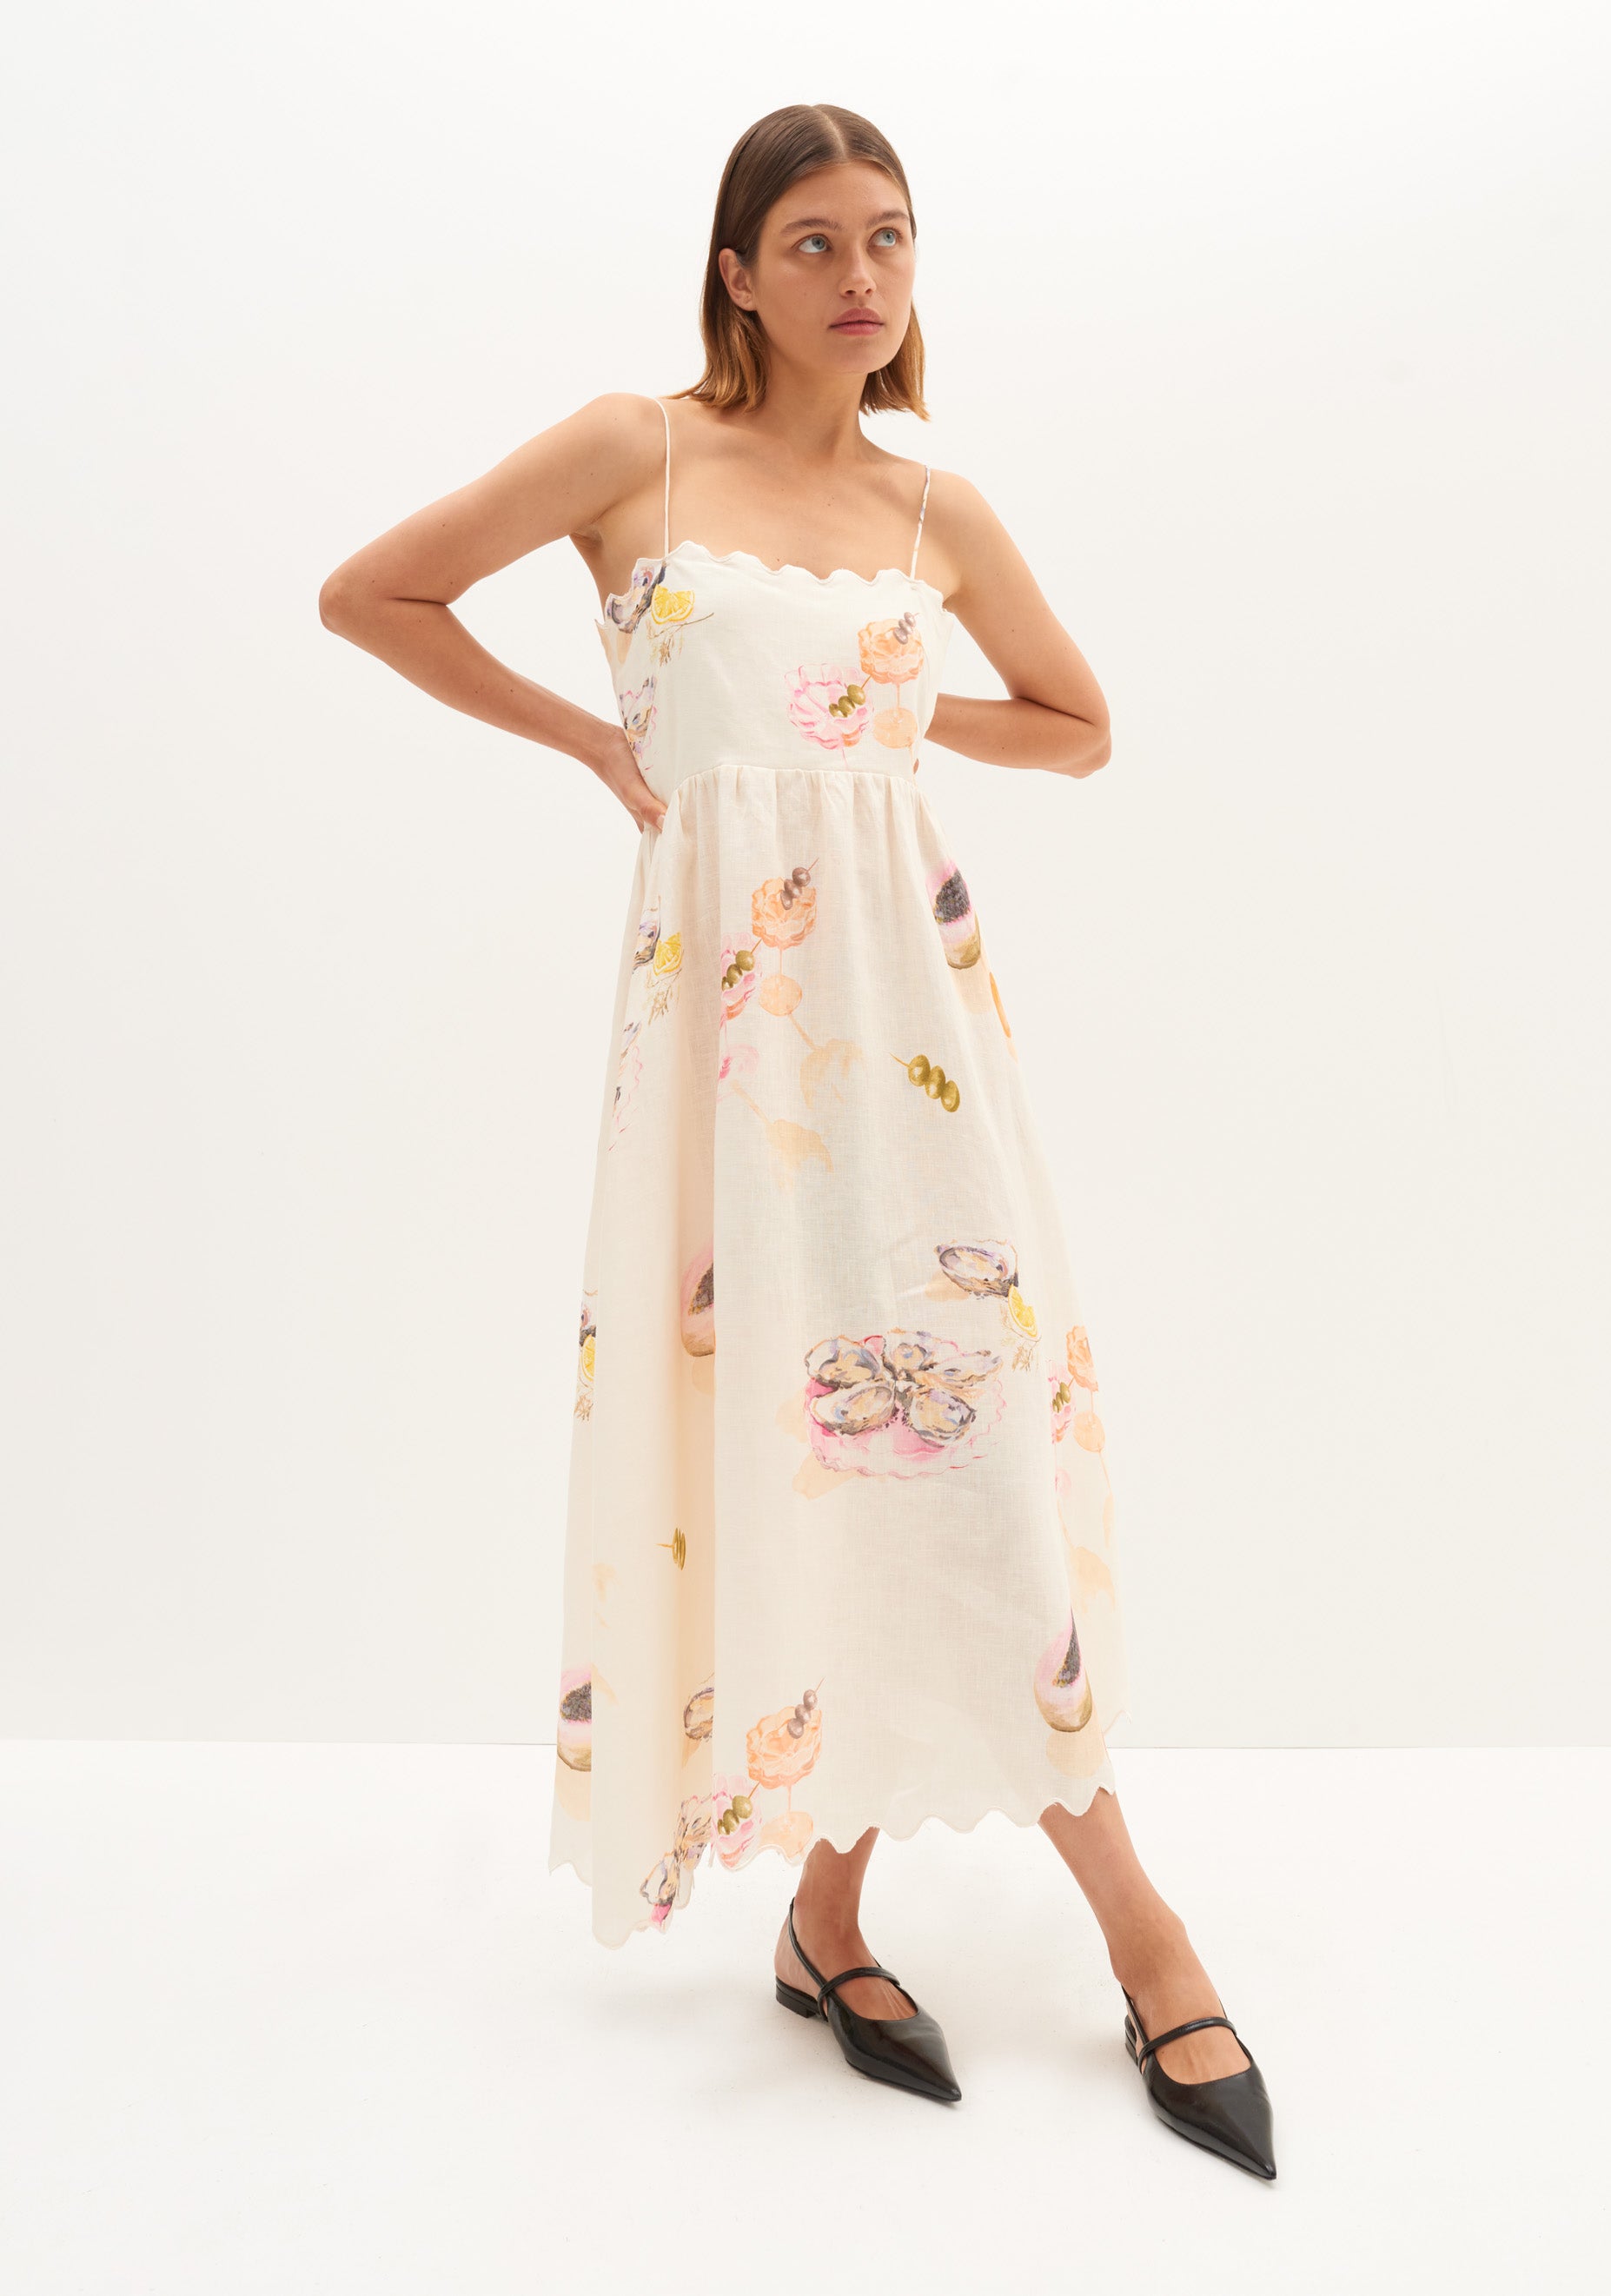 Paisley Printed Maxi Dress - Adored By Alex